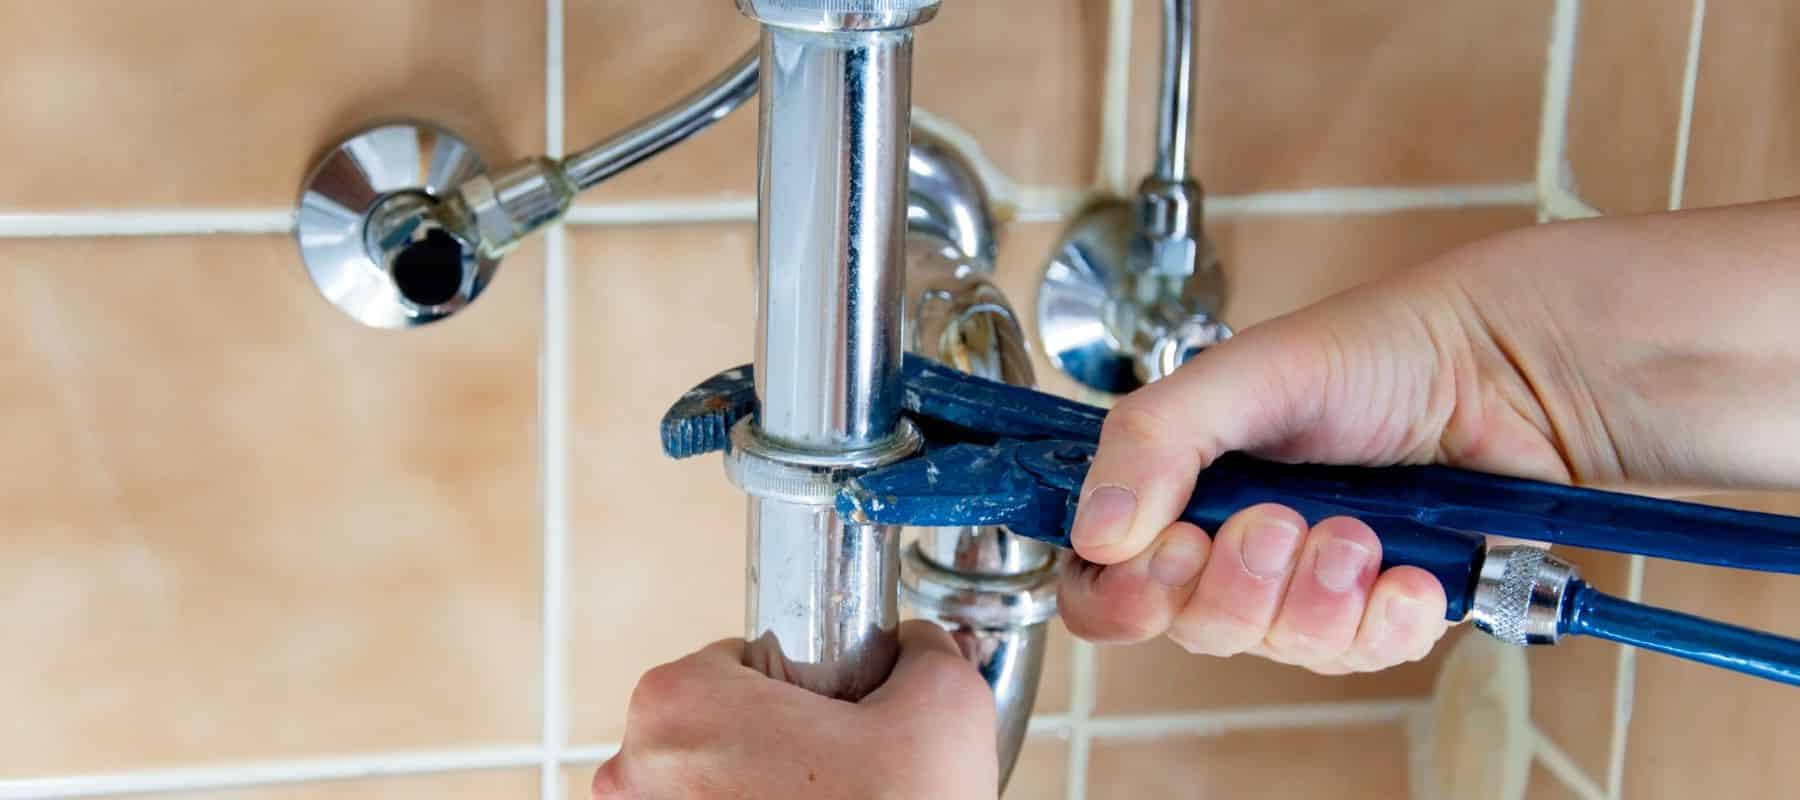 closeup of a plumber hand holding a blue wrench to tighten a section of a silver pipe under a kitchen sink